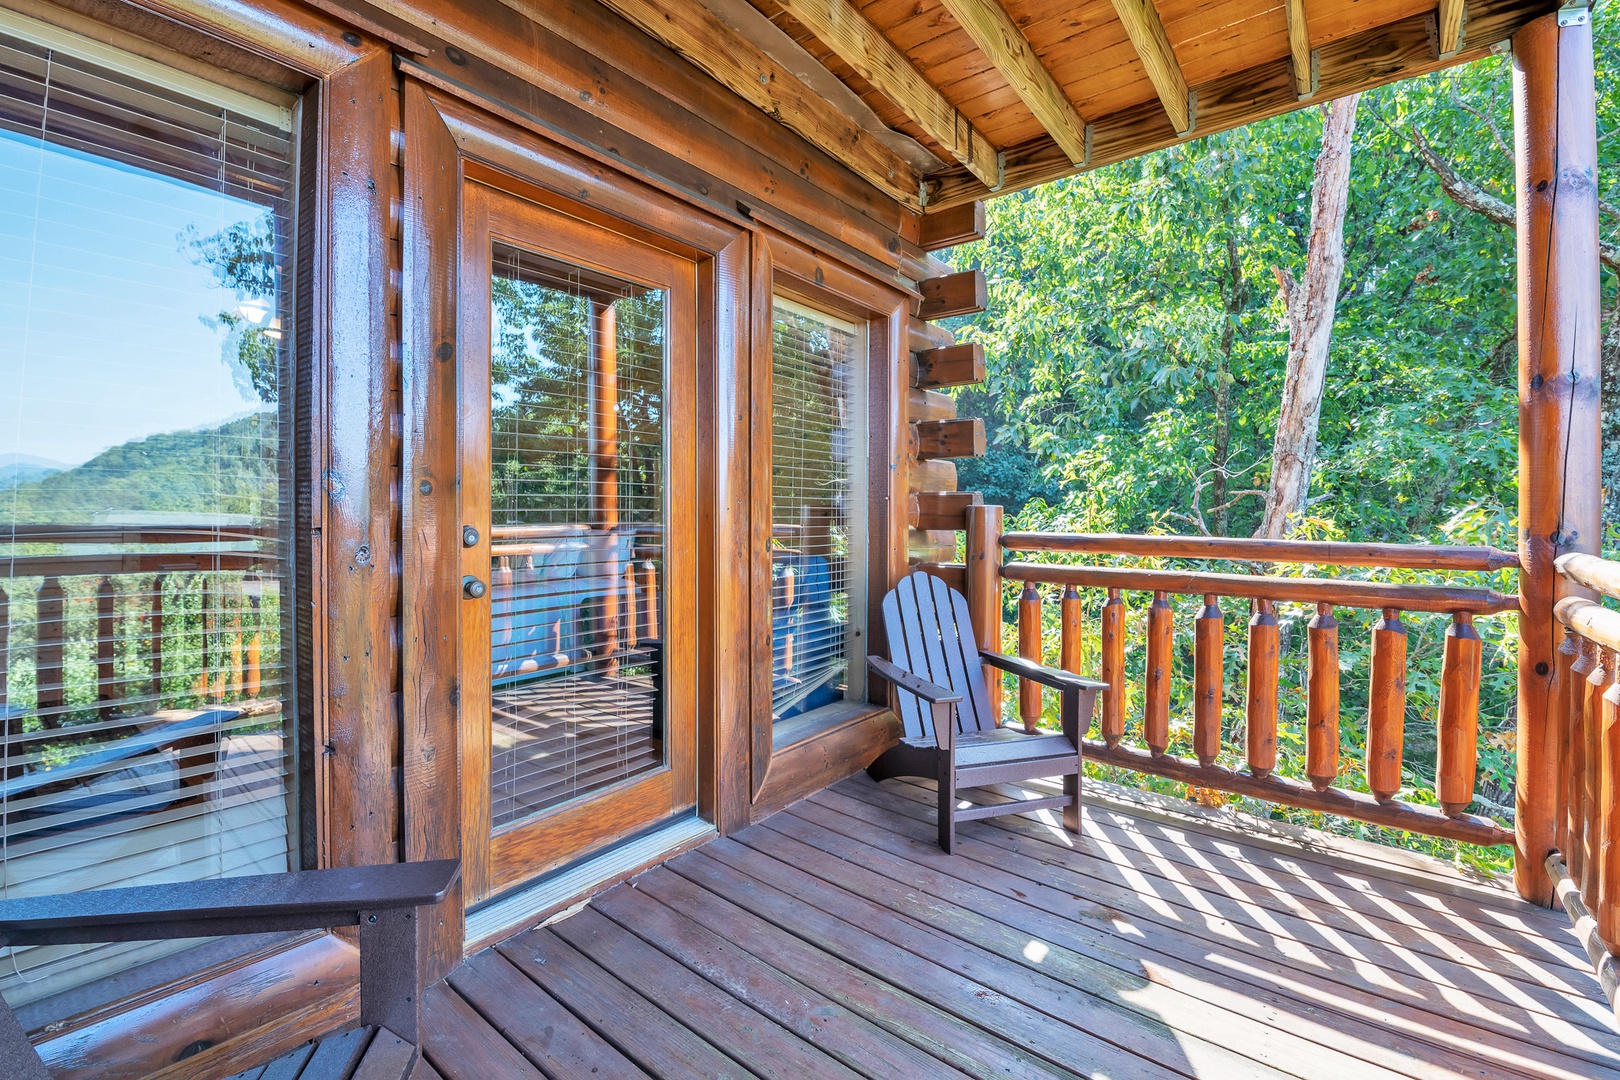 Take in the views & fresh air on the third bedroom’s balcony